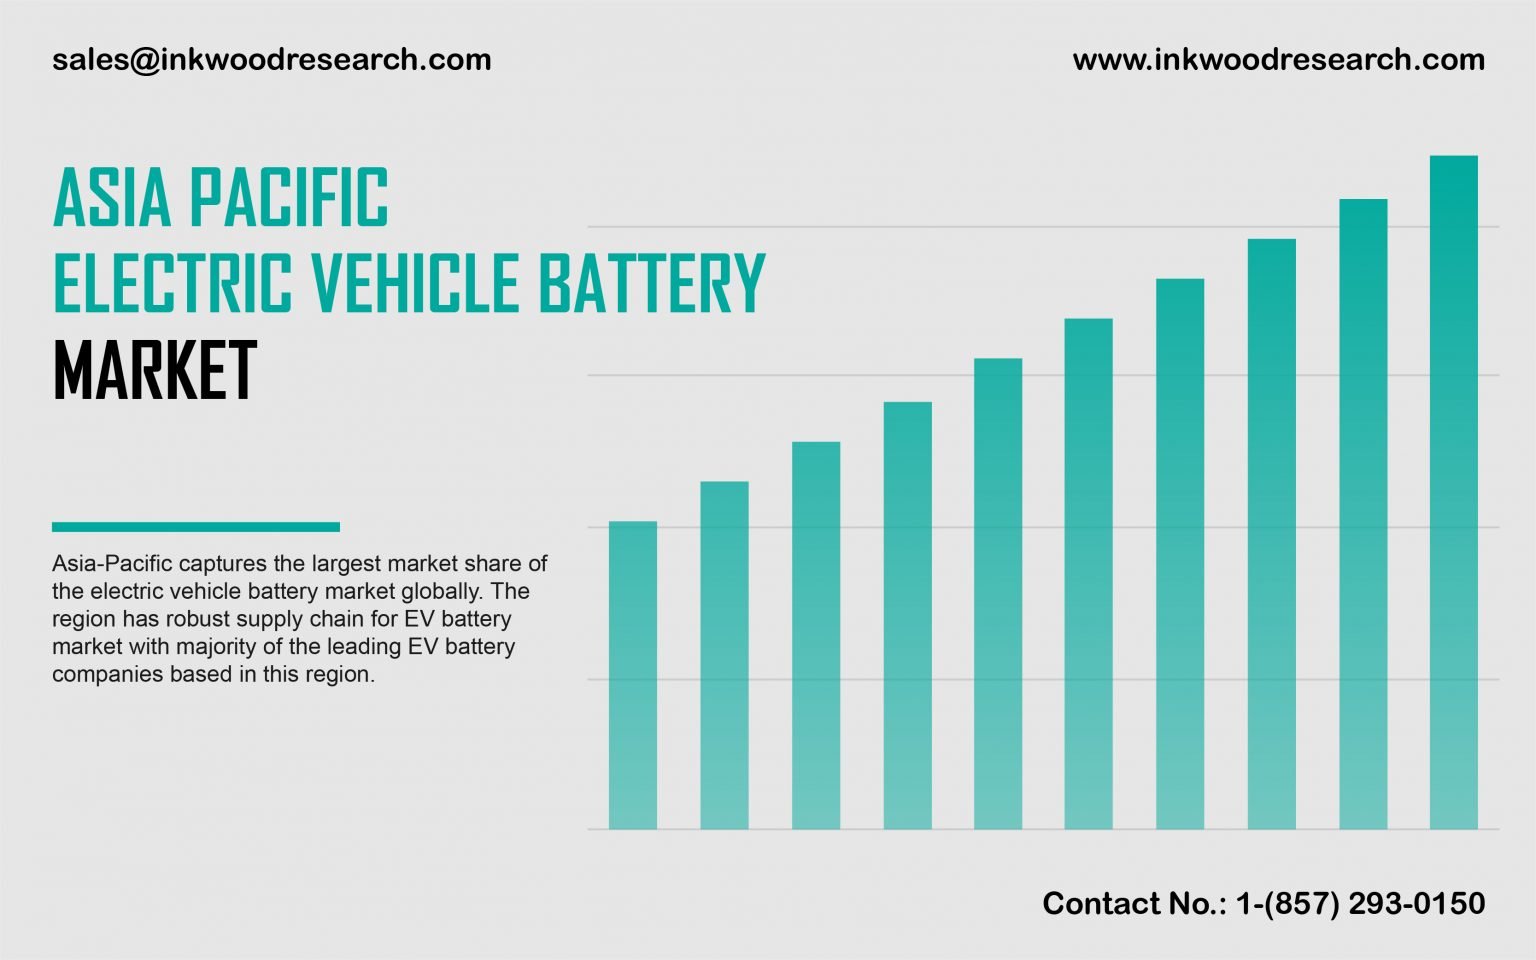 AsiaPacific Electric Vehicle Battery Market Trends, Size